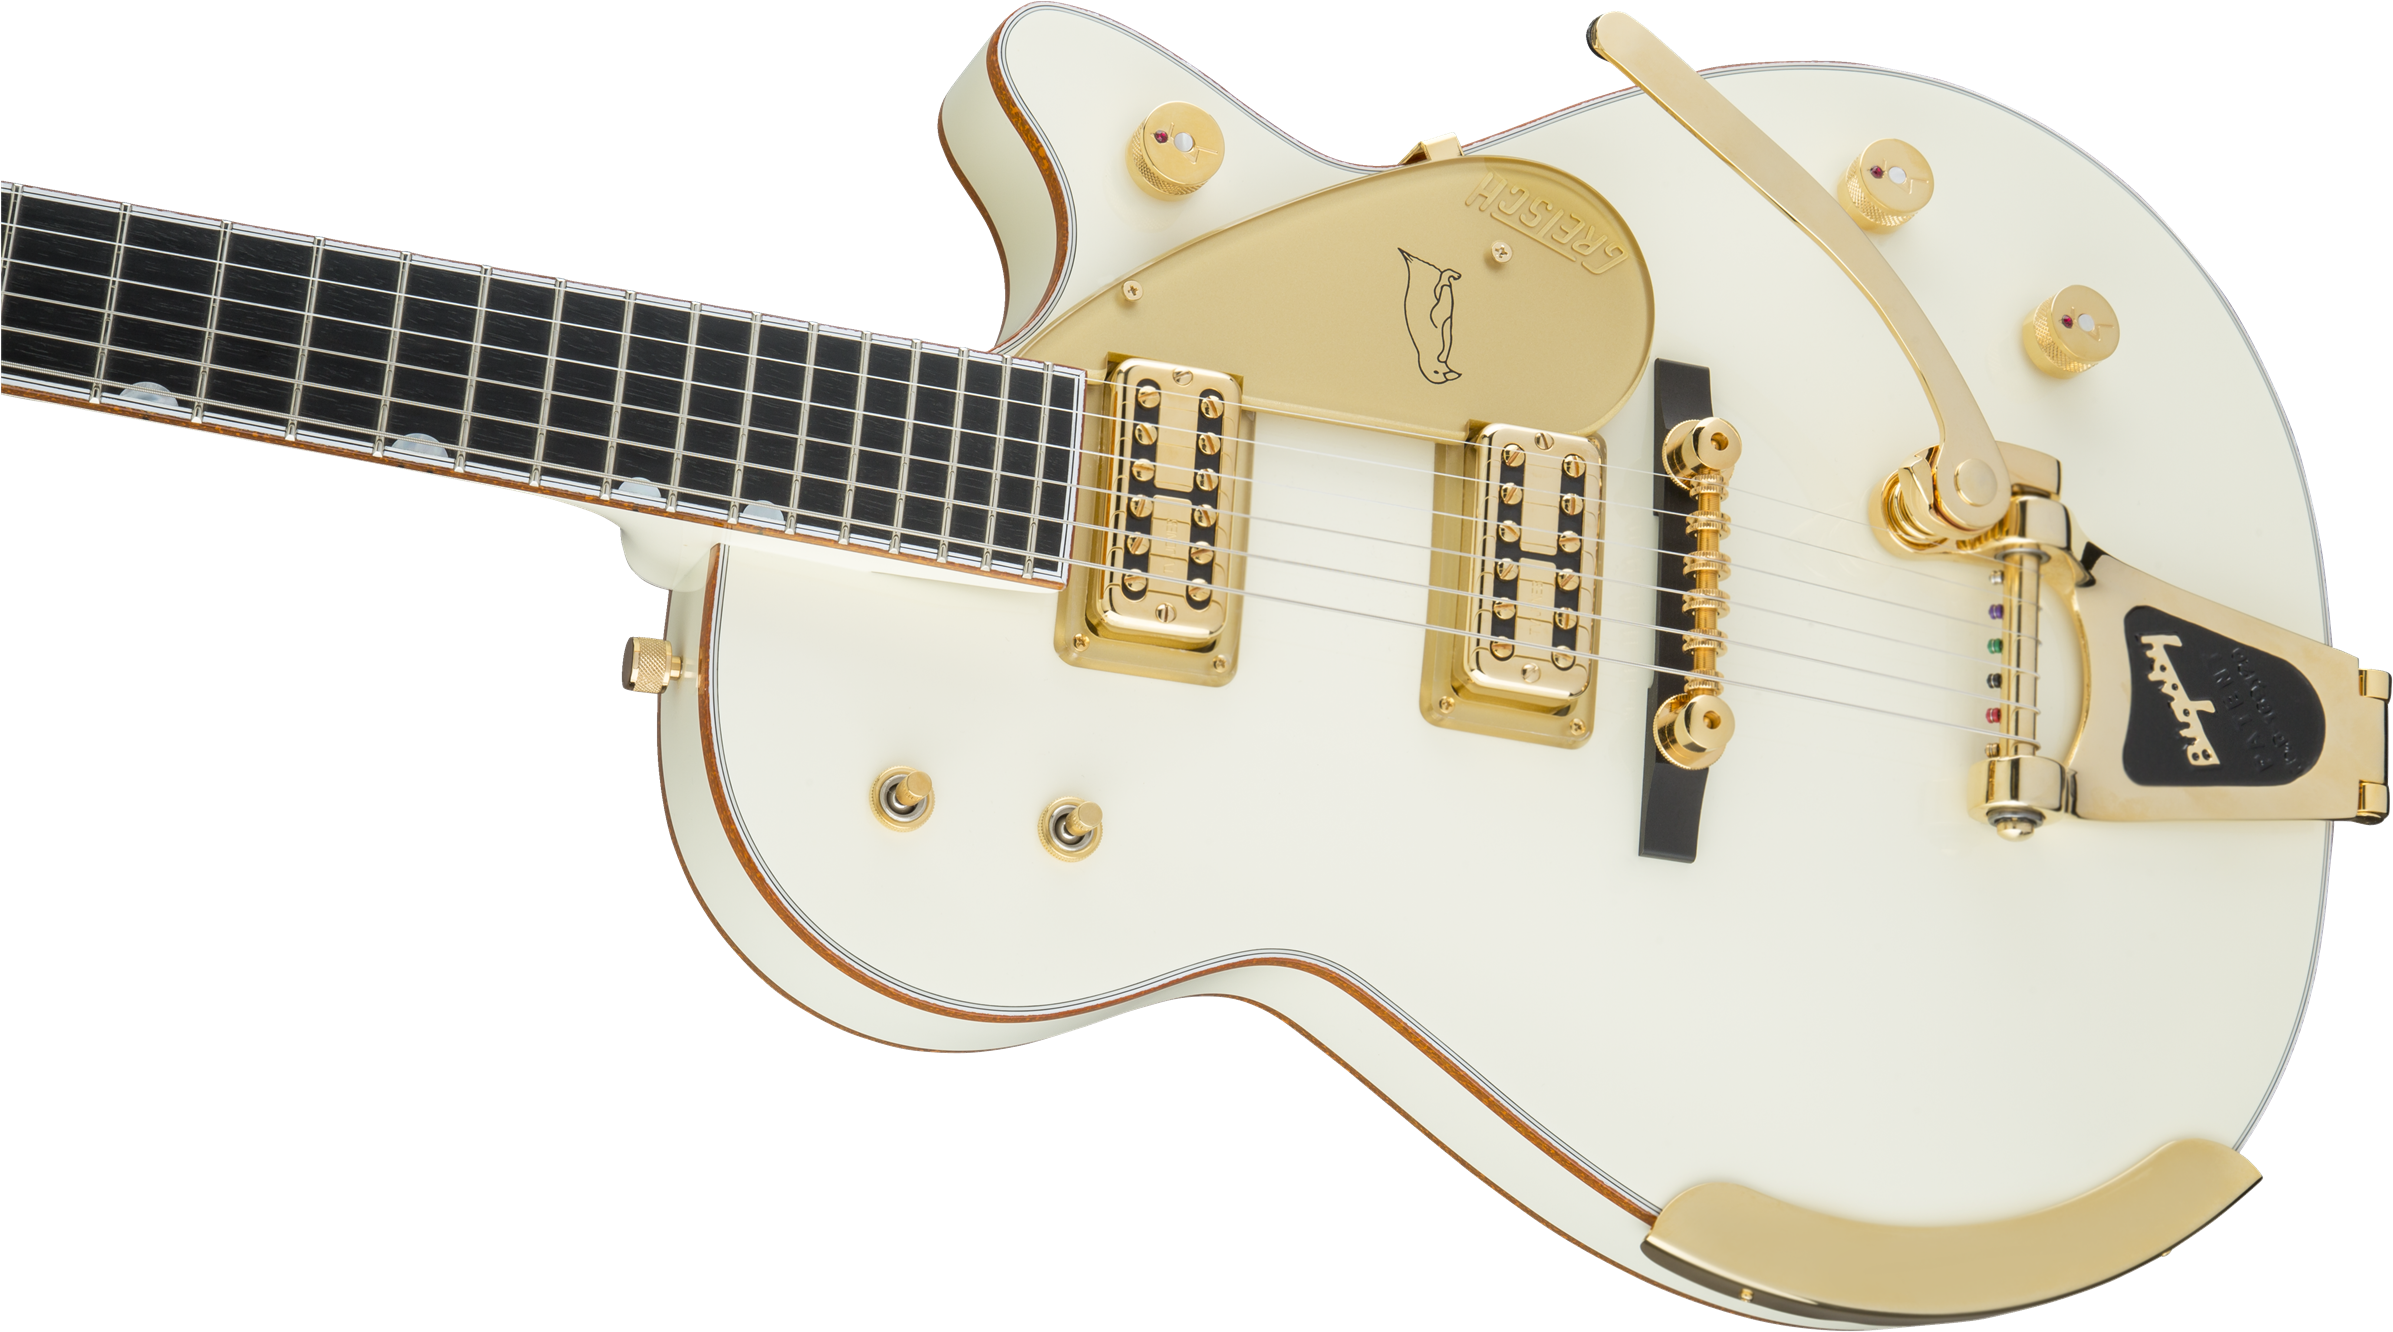 G6134t-58 Vintage Select '58 Penguin™ With Bigsby®, - Gretsch White Falcon G6136t Wht Players Edition (2400x1339)